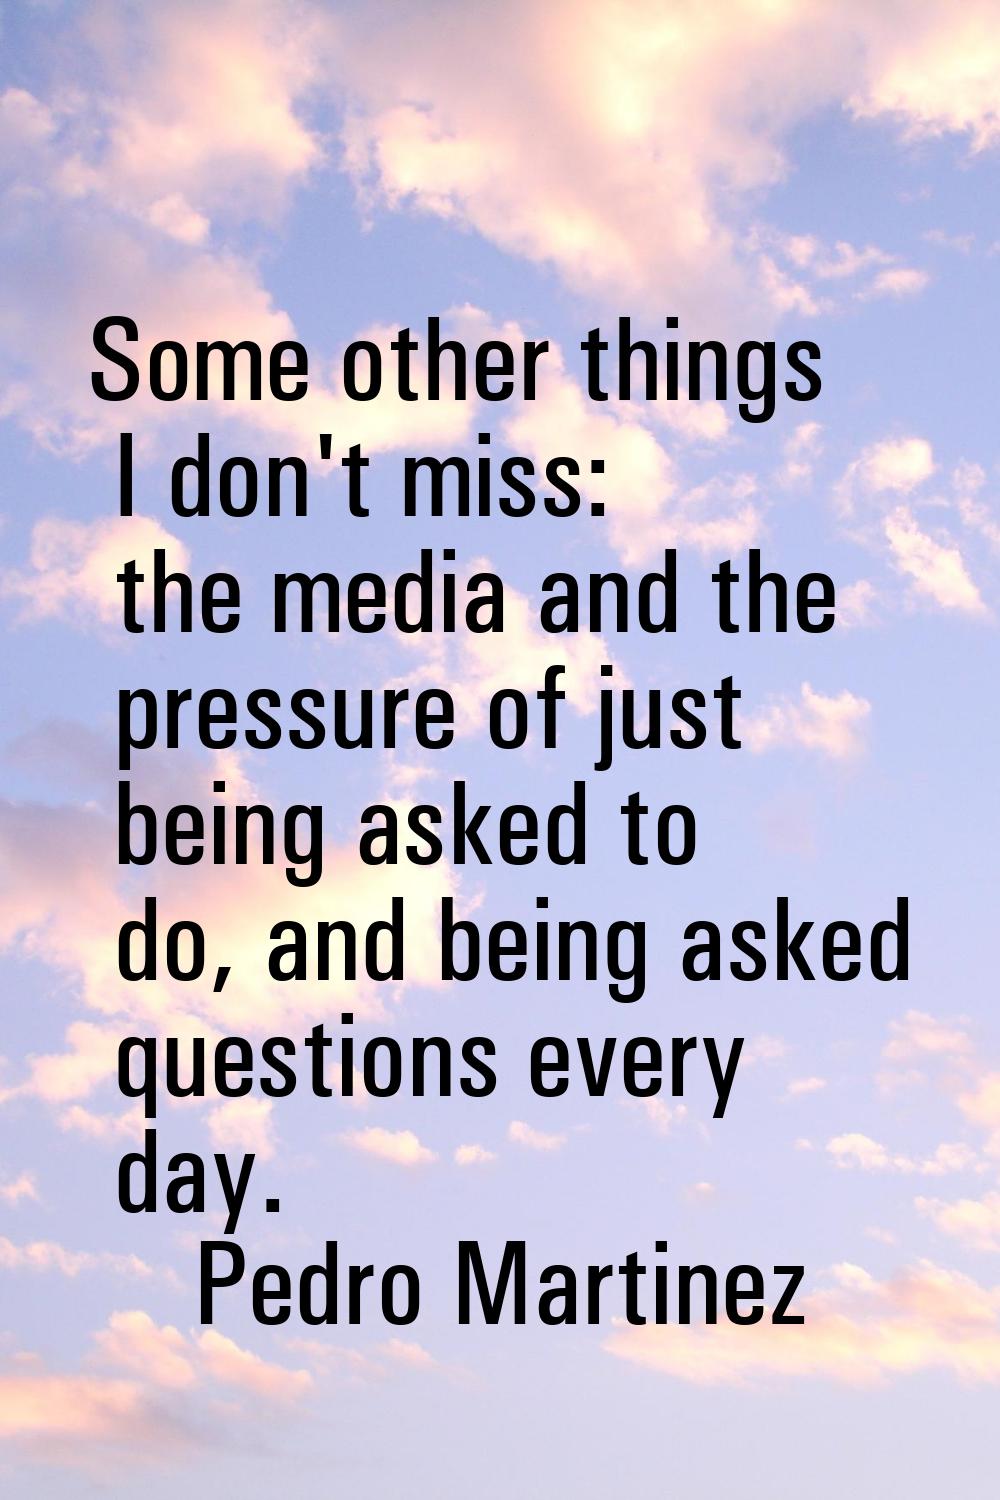 Some other things I don't miss: the media and the pressure of just being asked to do, and being ask